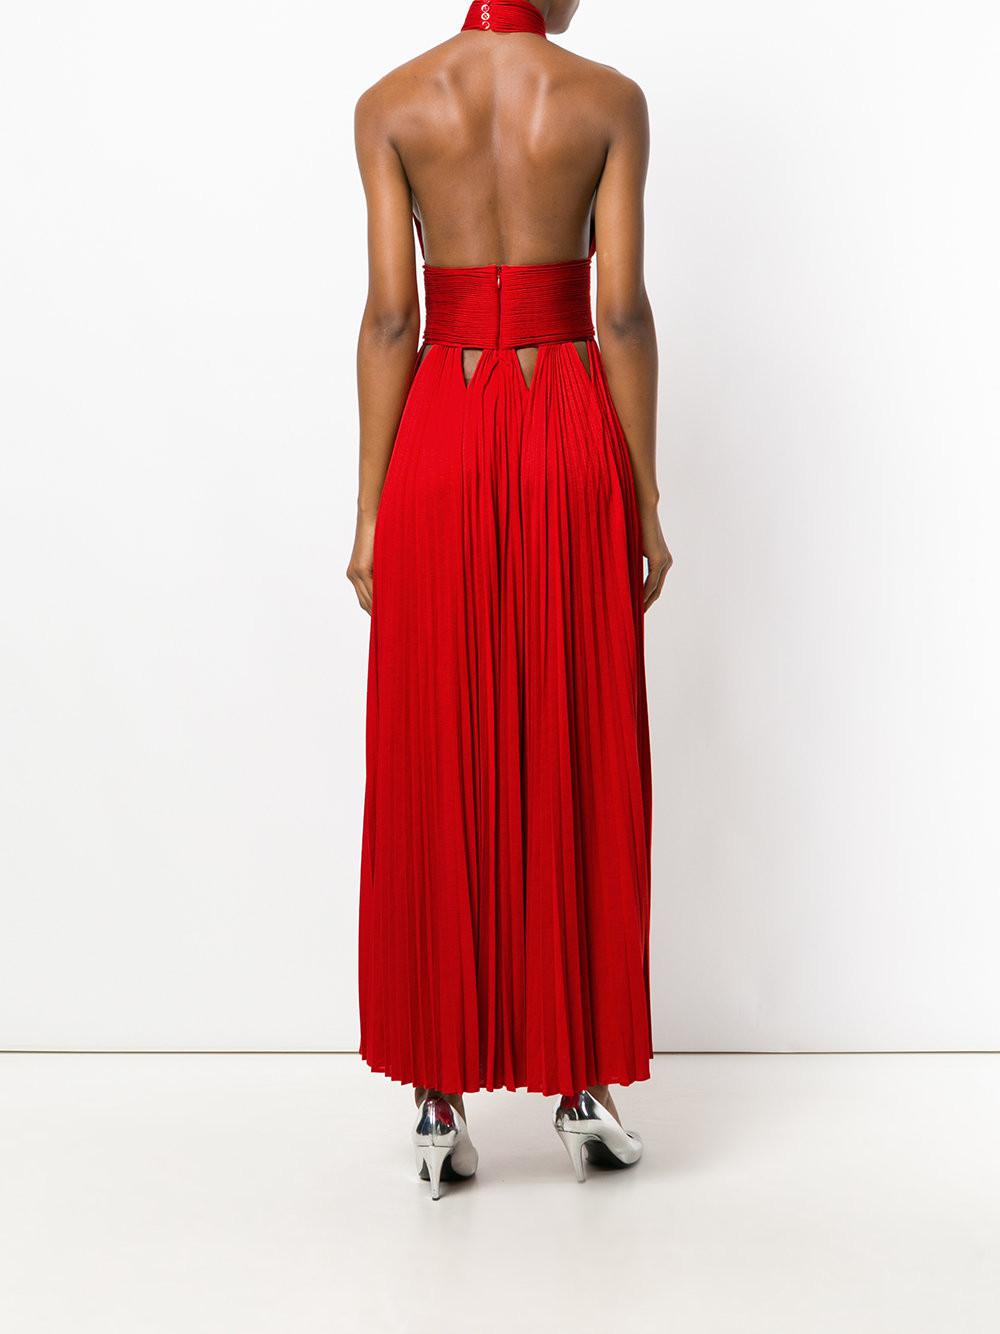 Lyst - Givenchy Halterneck Pleated Dress in Red